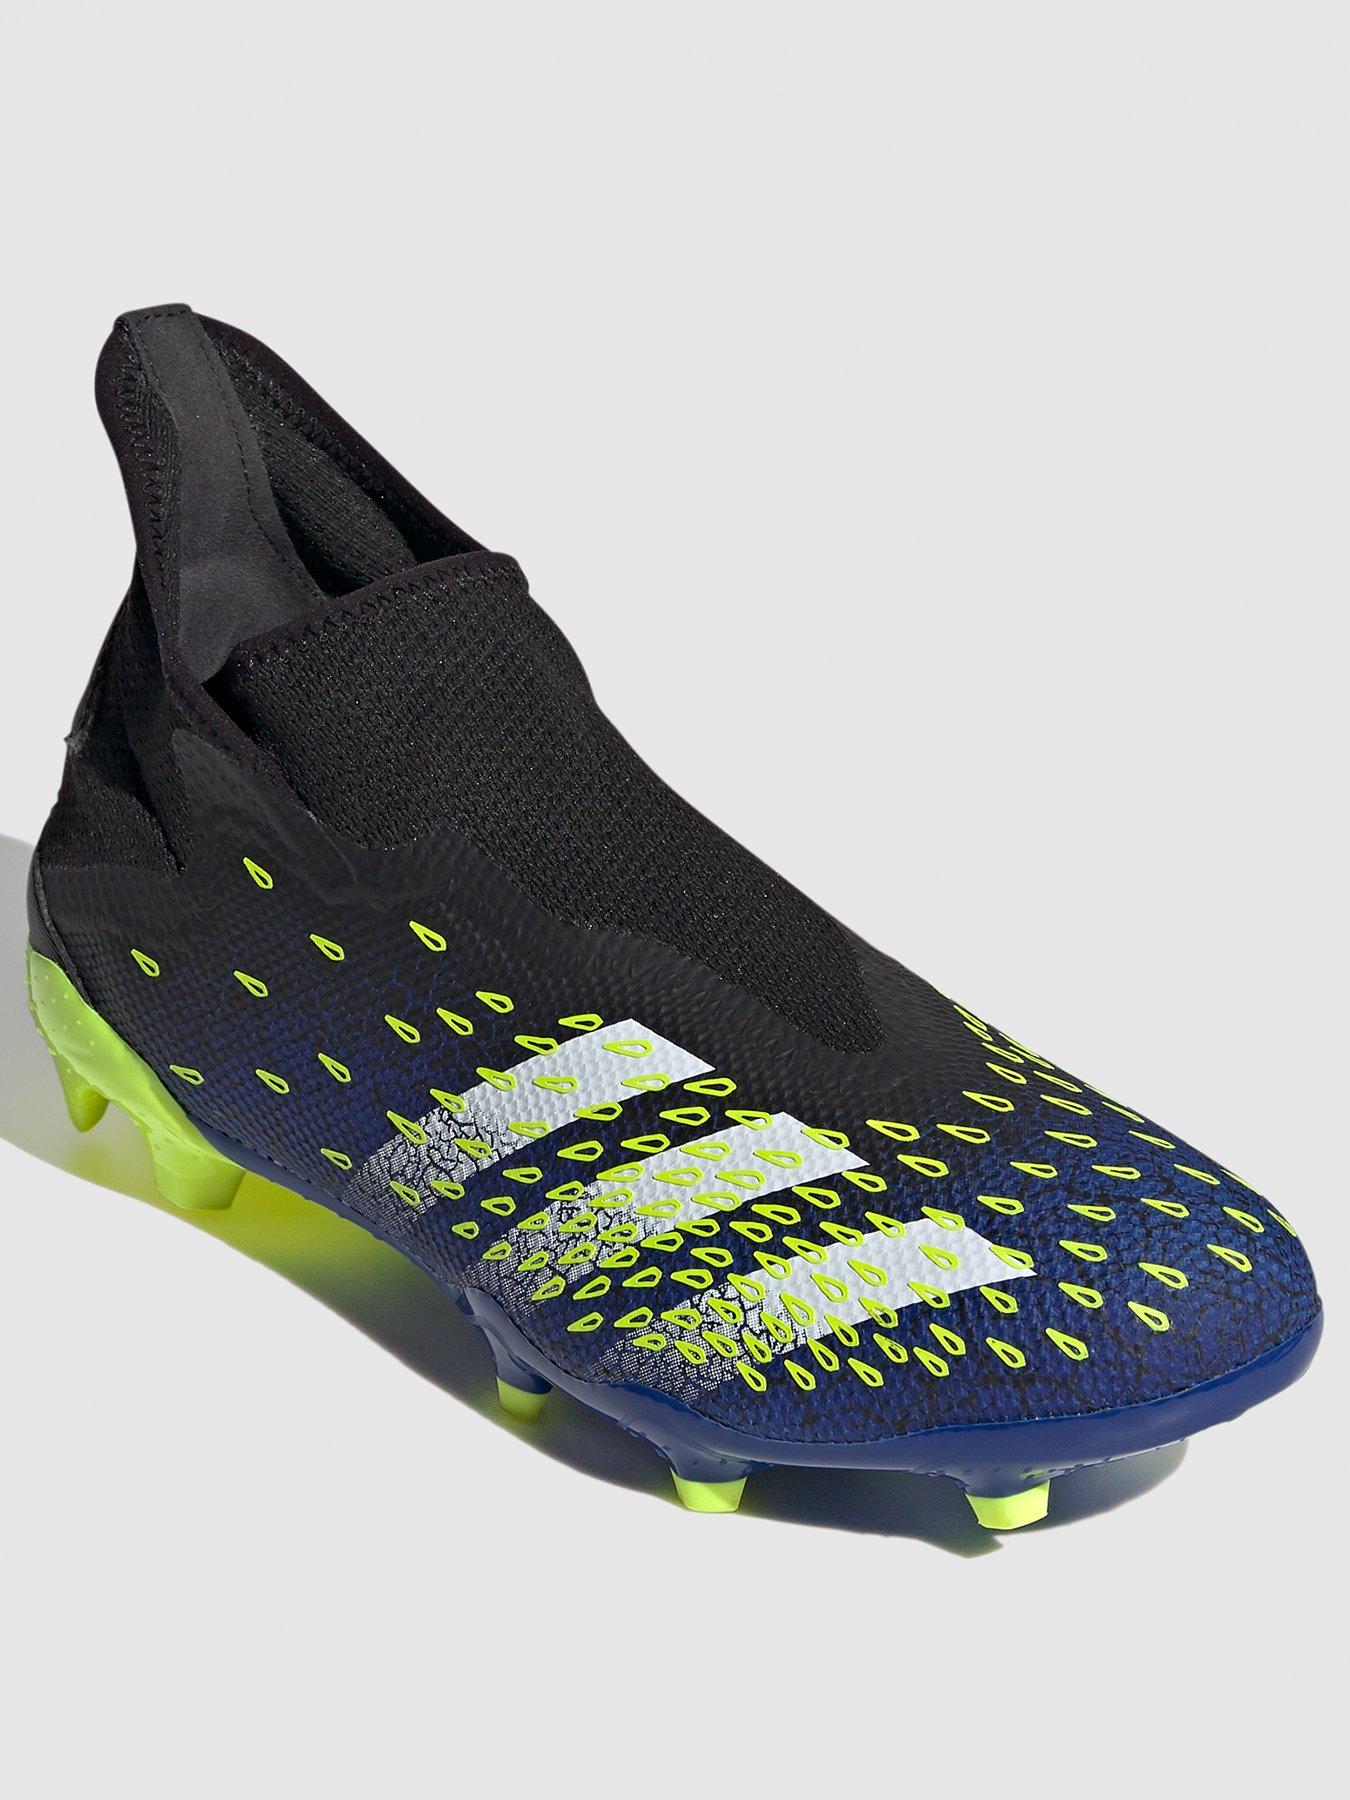 very football boots